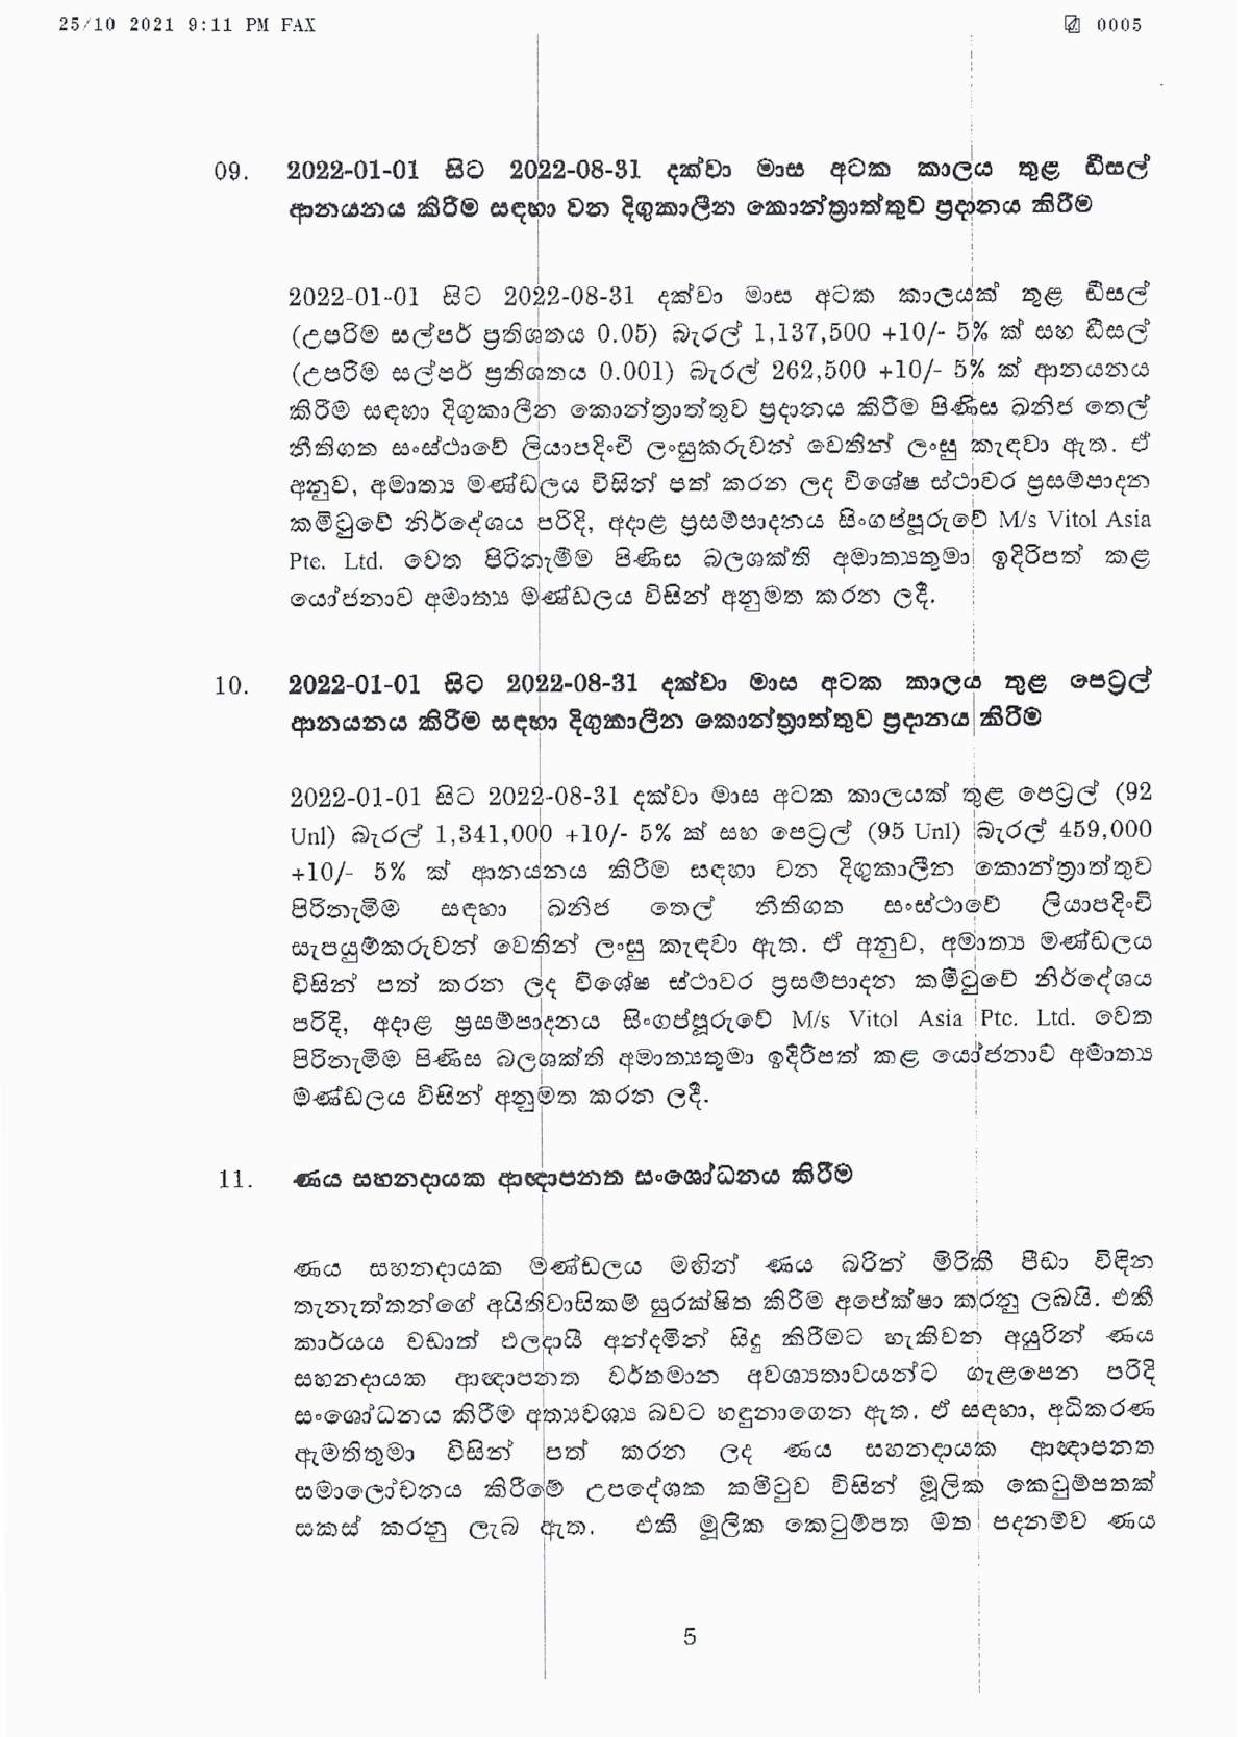 Cabinet Decisions on 25.10.2021 page 001